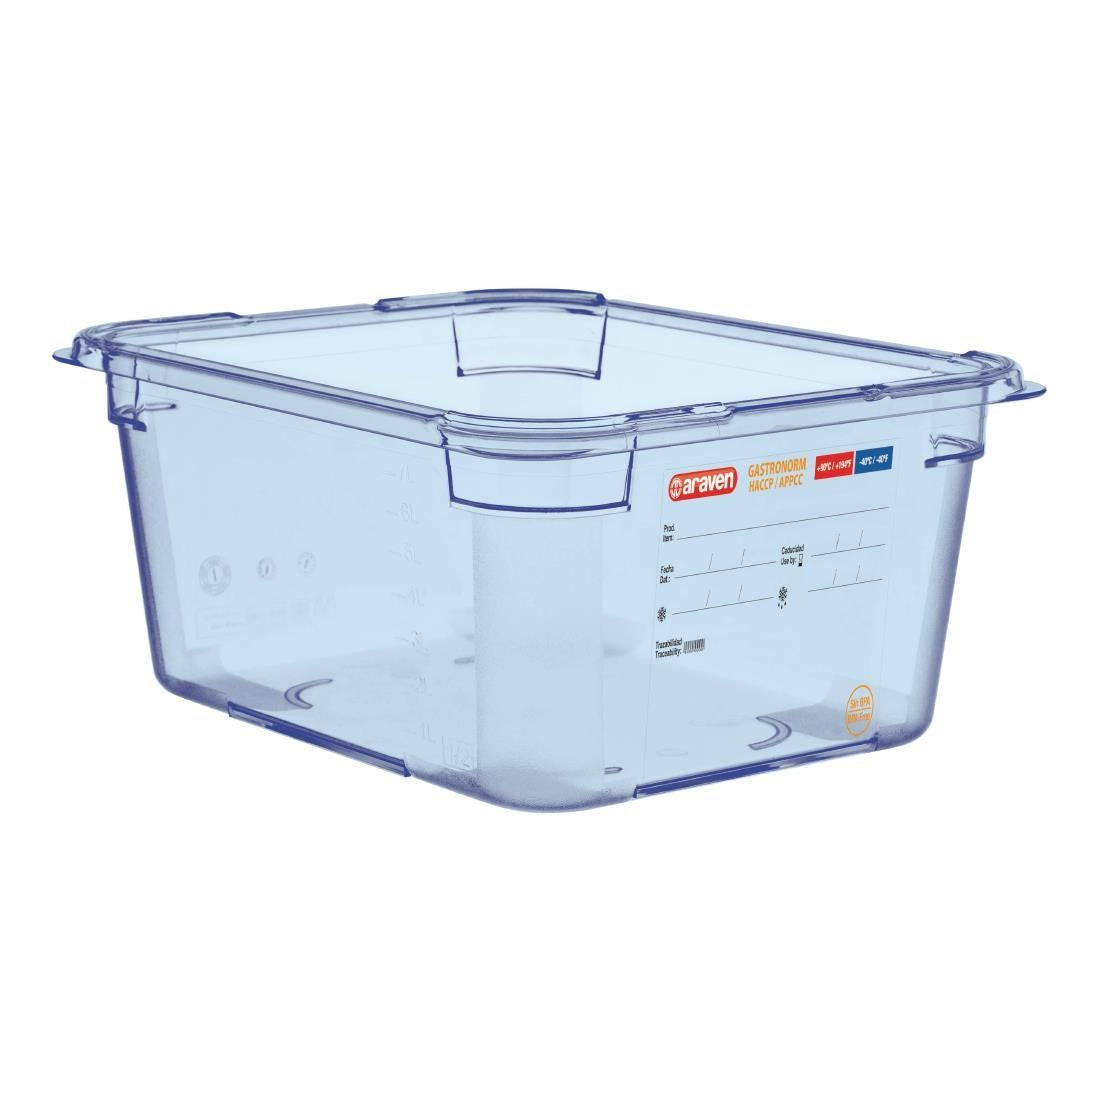 GP585 Araven ABS Food Storage Container Blue GN 1/2 150mm JD Catering Equipment Solutions Ltd